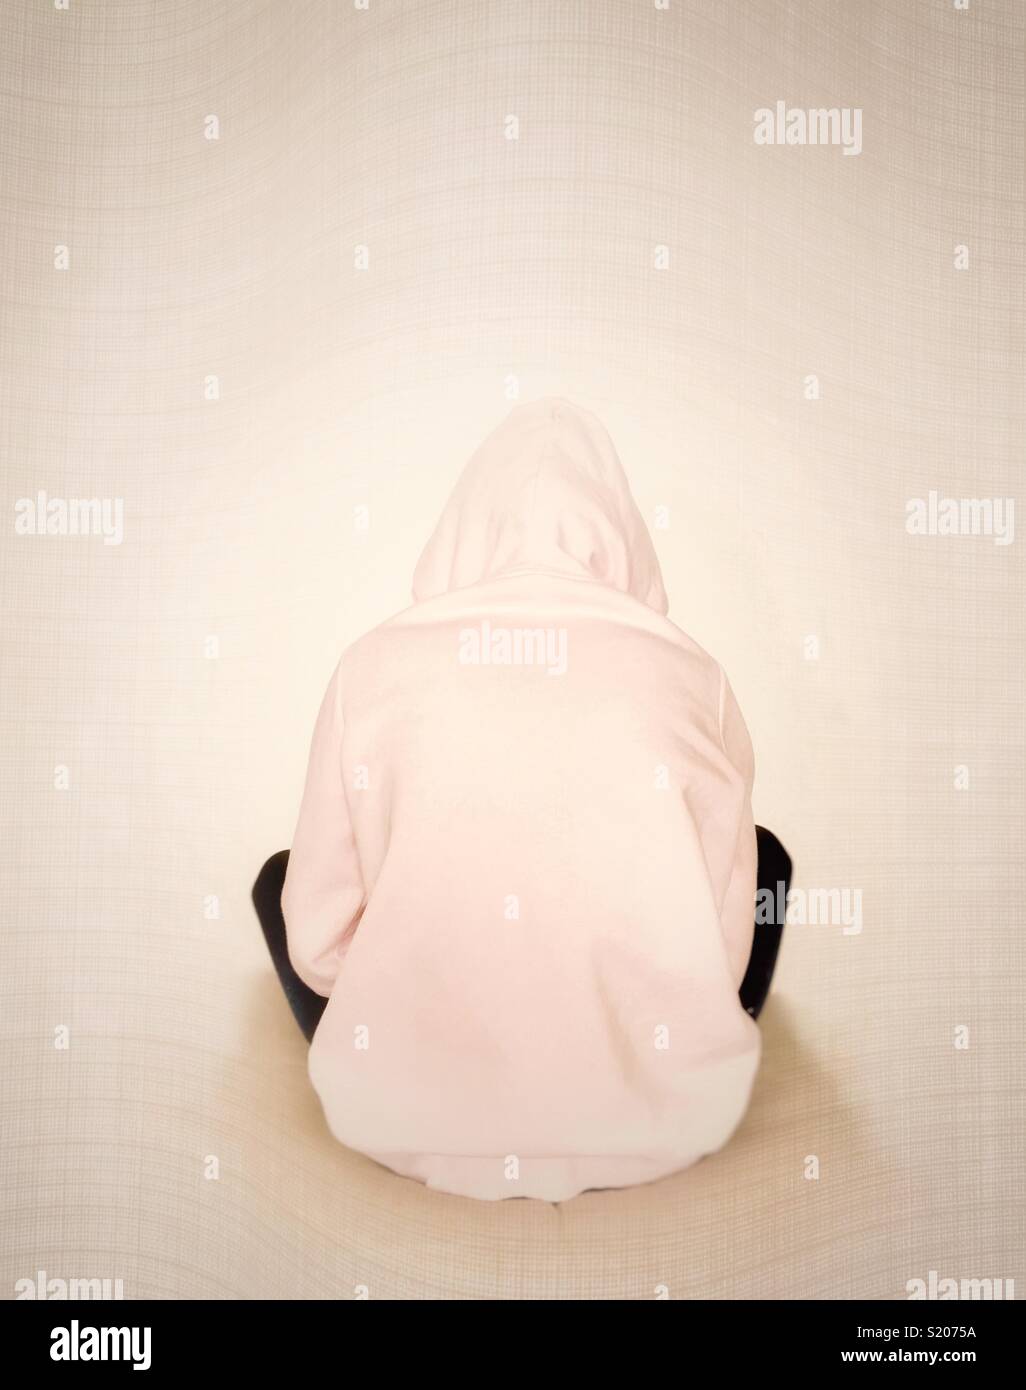 Young girl in pink hoody with back to camera and facing wall. Stock Photo